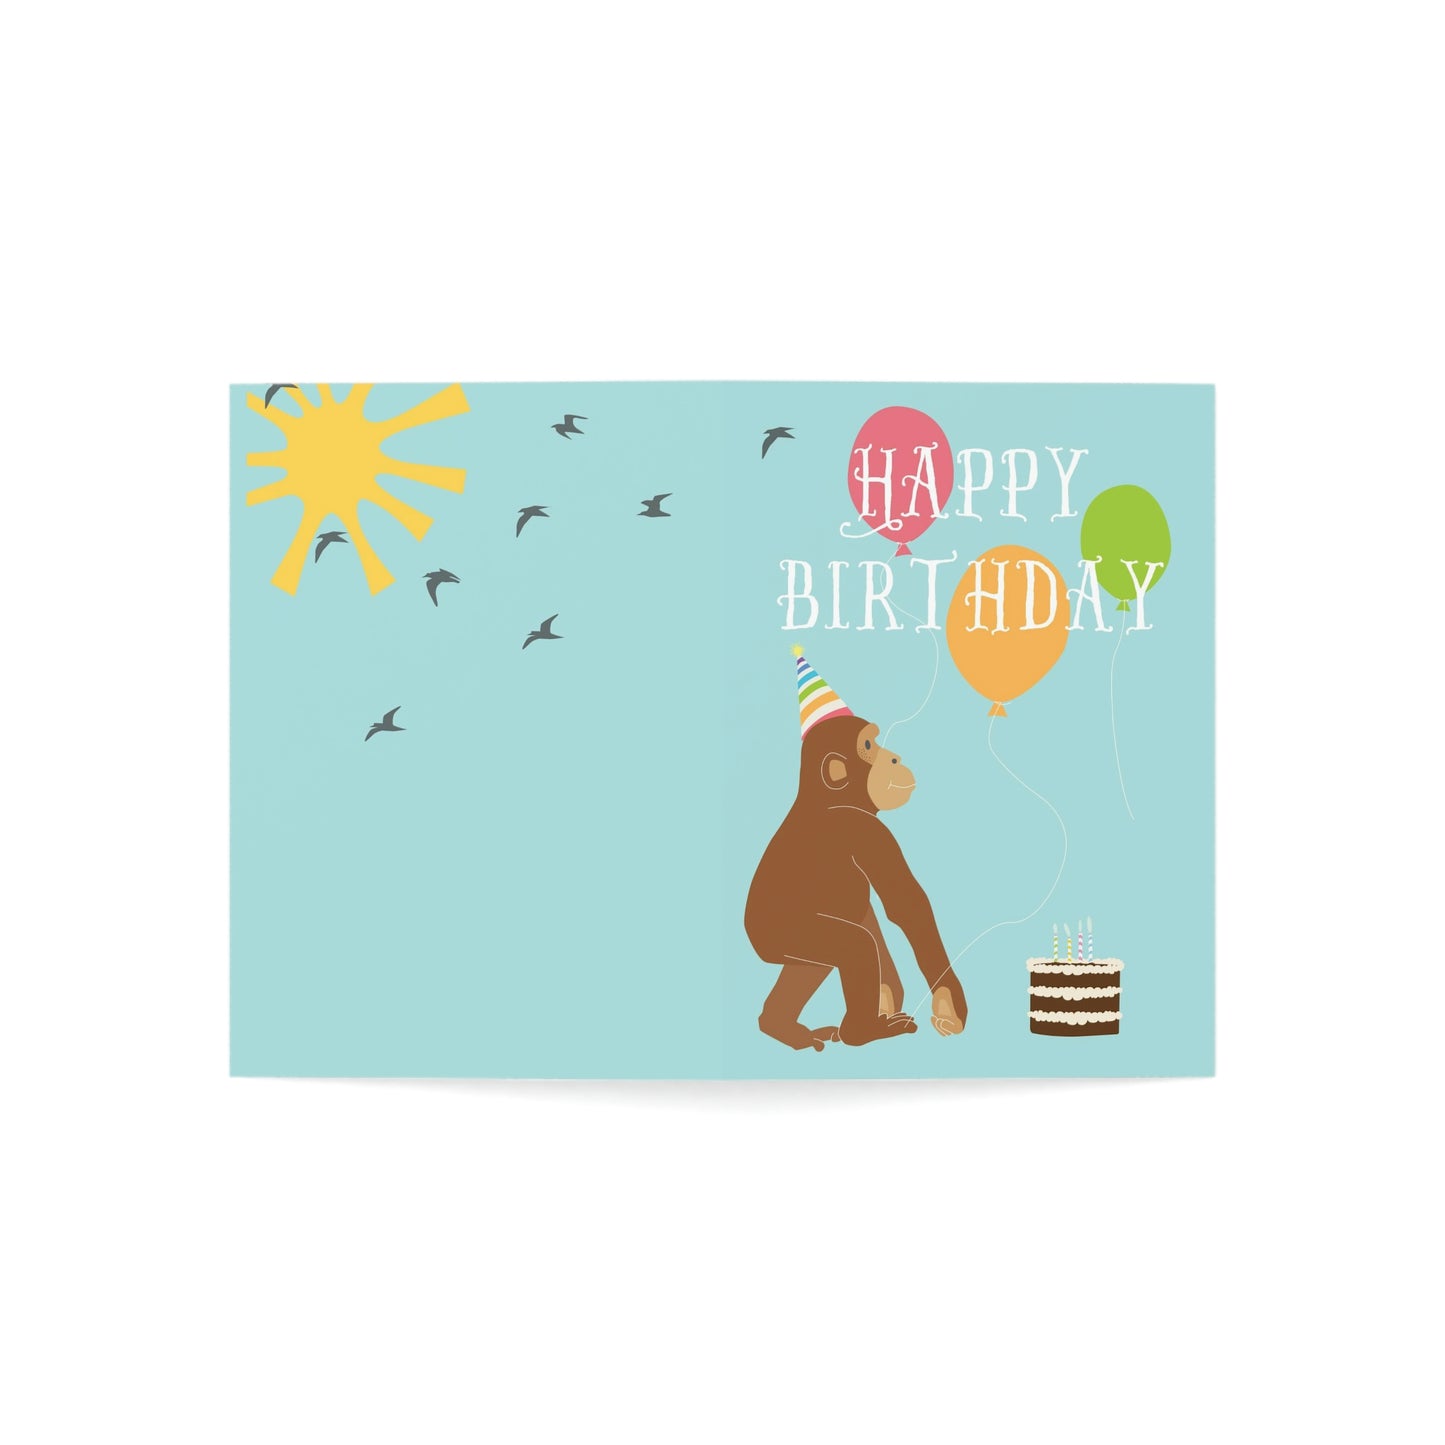 Open Cover Shot of the Monkey Birthday Card